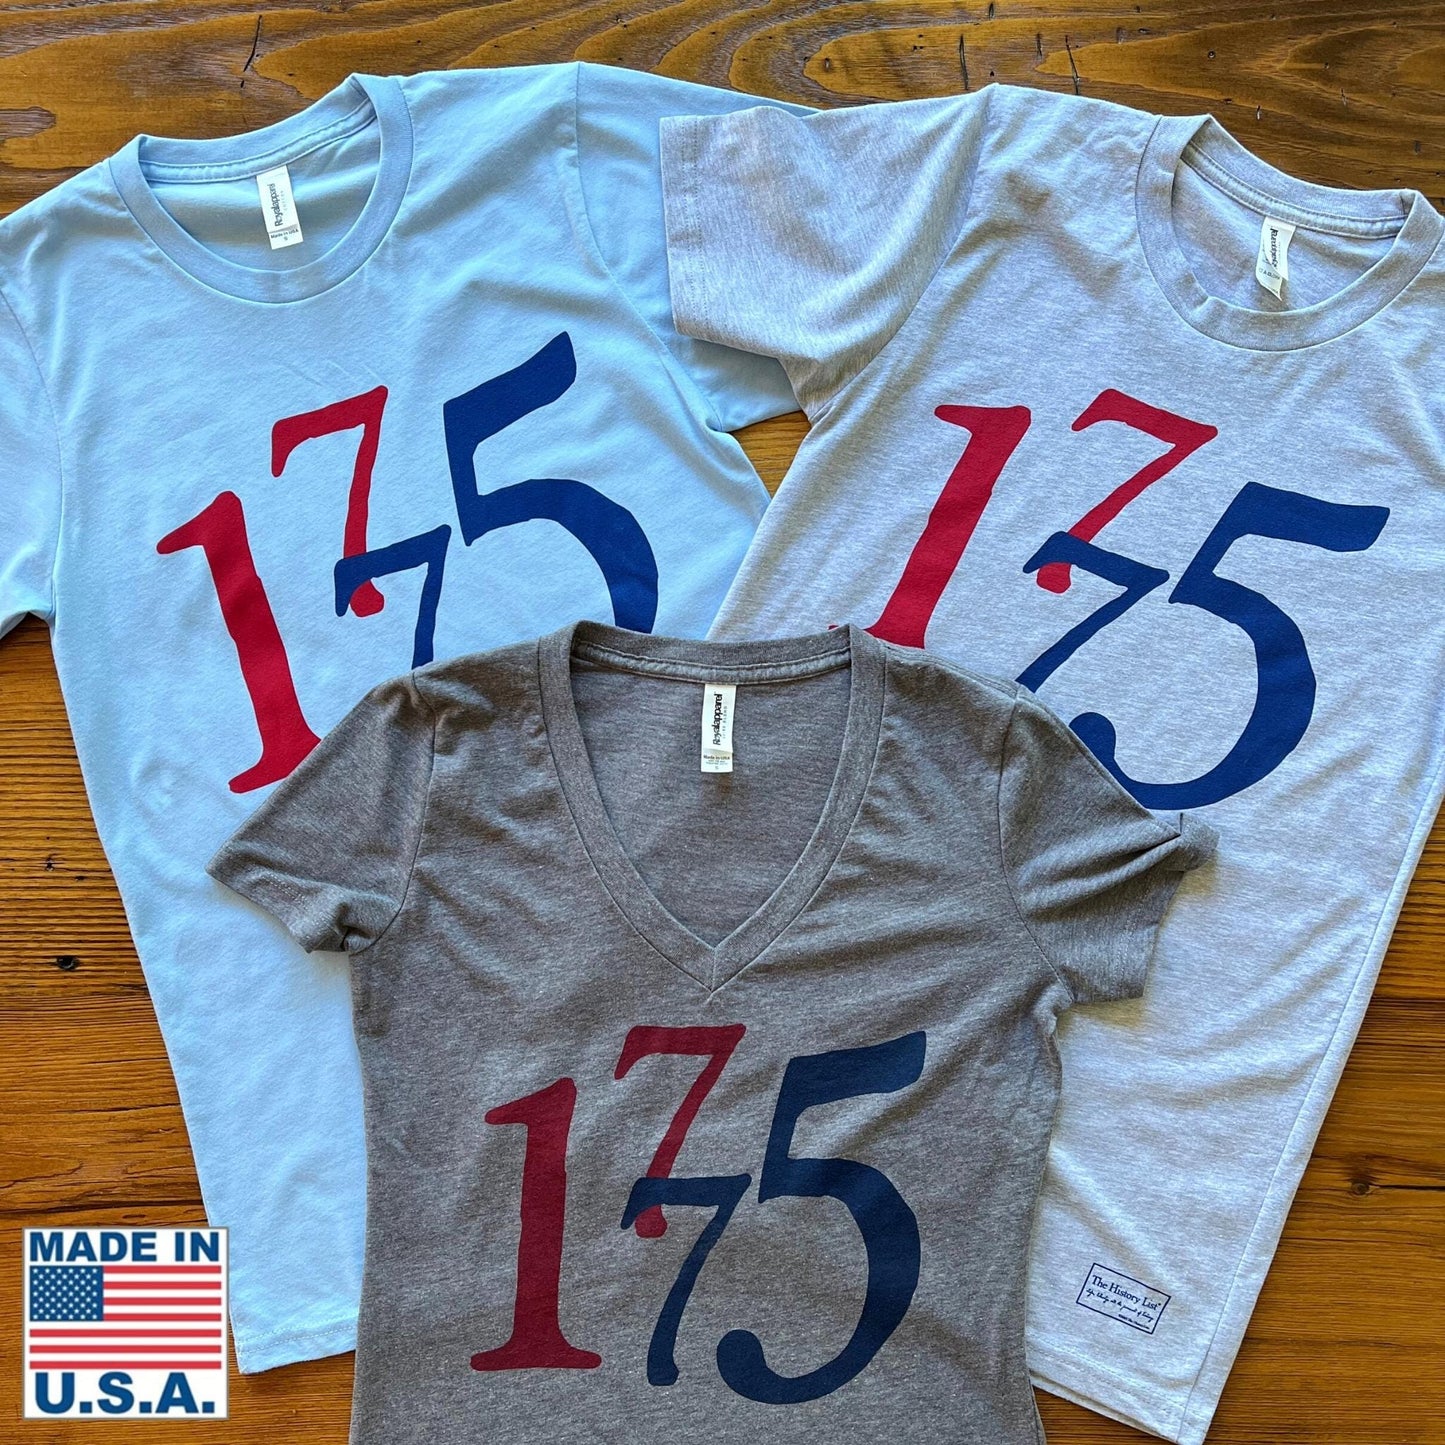 Lexington and Concord "1775" Shirt — Made in the USA Shirts from The History List store